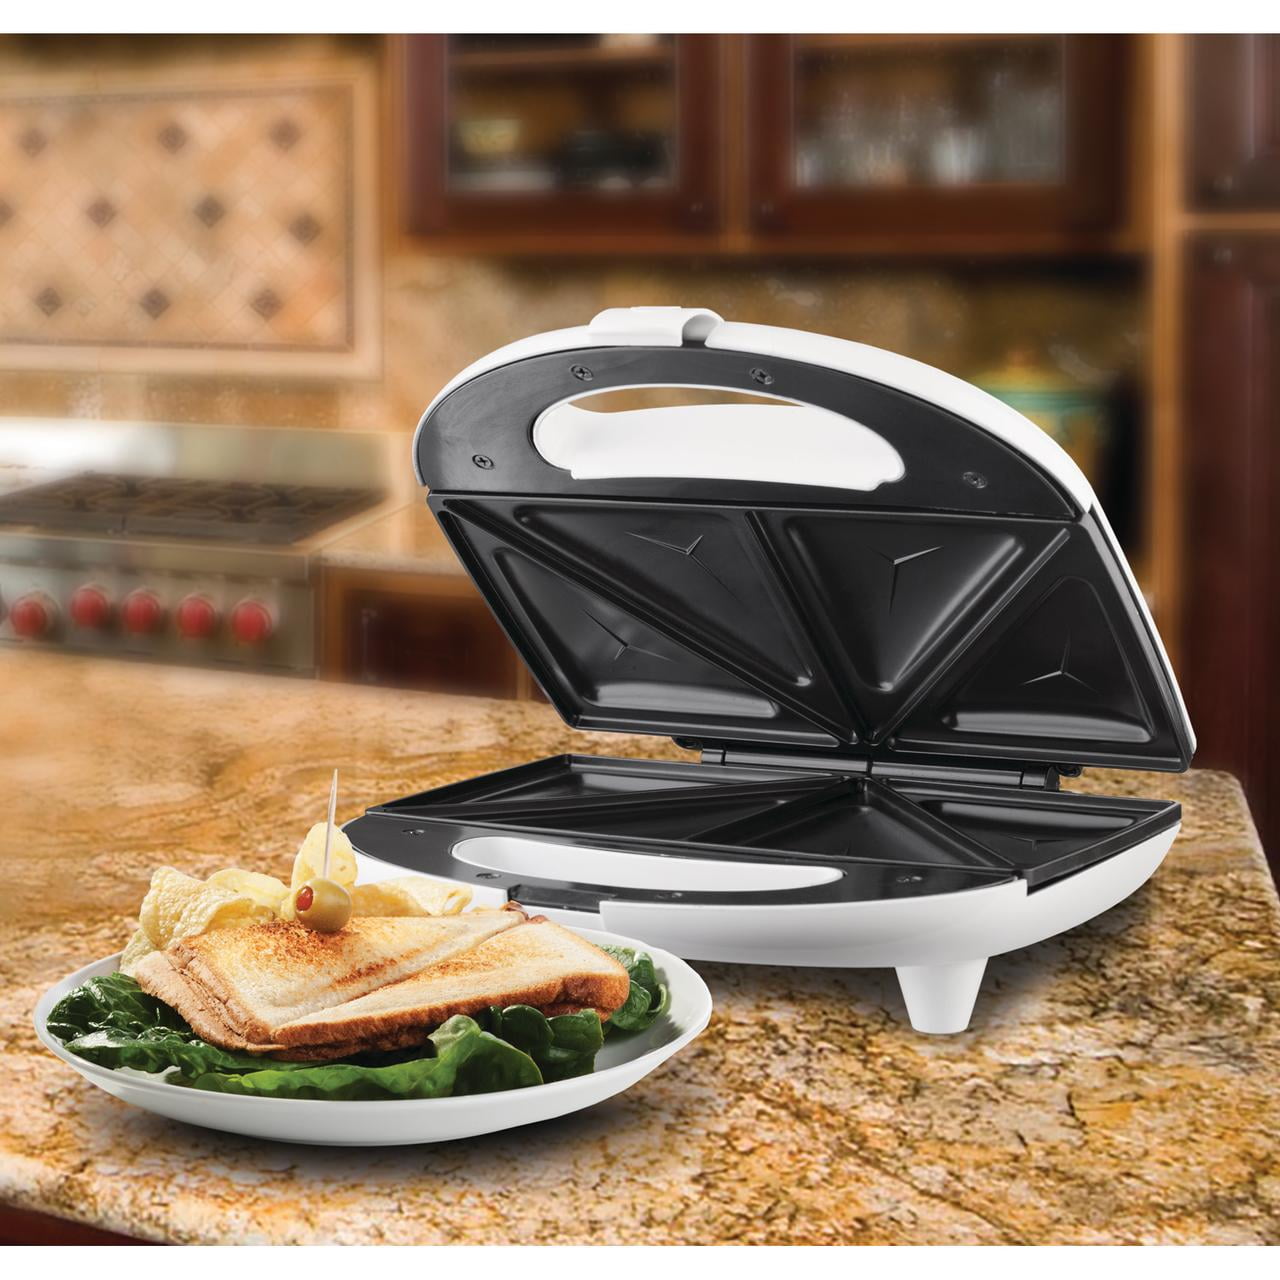 BRAND NEW Brentwood TS-240W Non-Stick Compact Dual Sandwich Maker White 